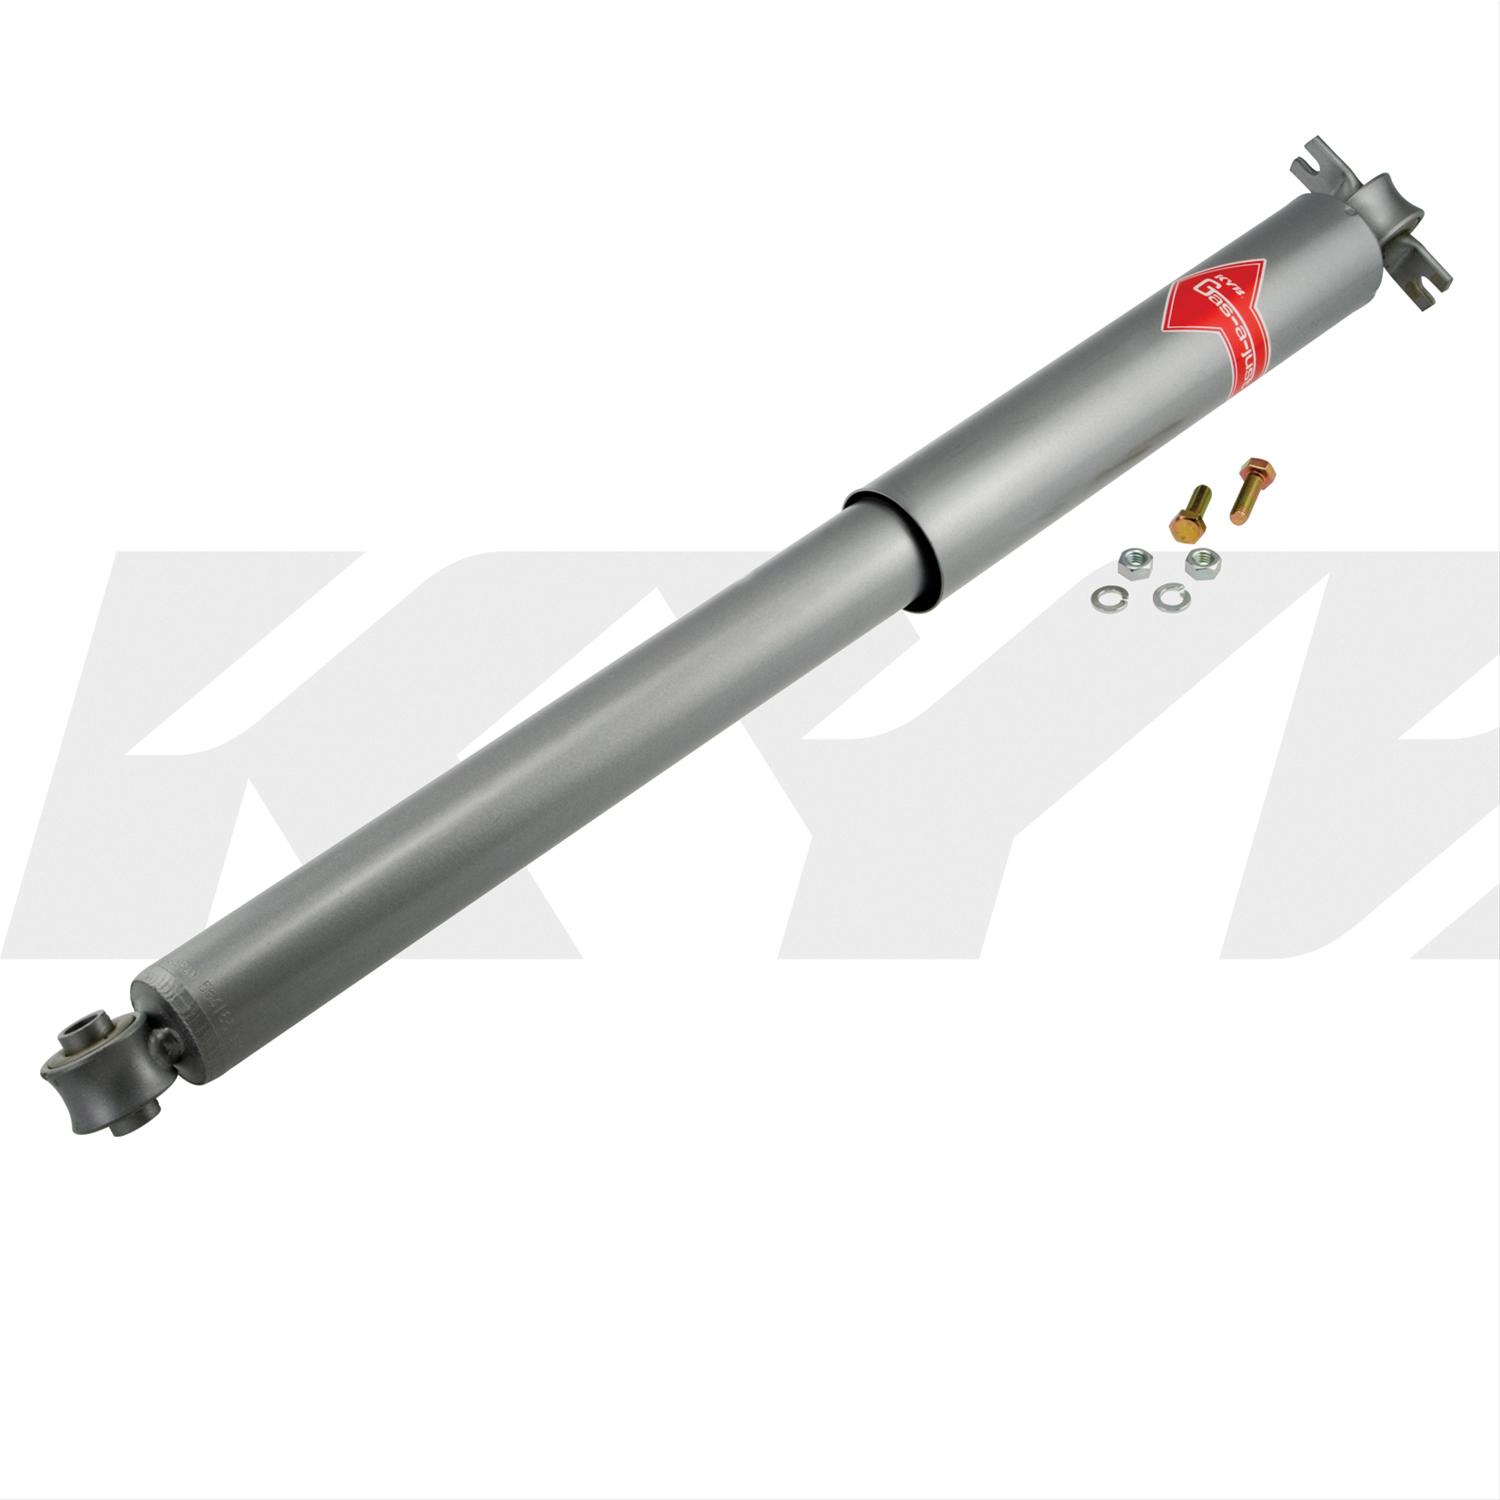 KYB Gas-a-Just Shocks and Struts KG5490KYB Gas-a-Just Shocks and Struts KG5490KYB-KG5490